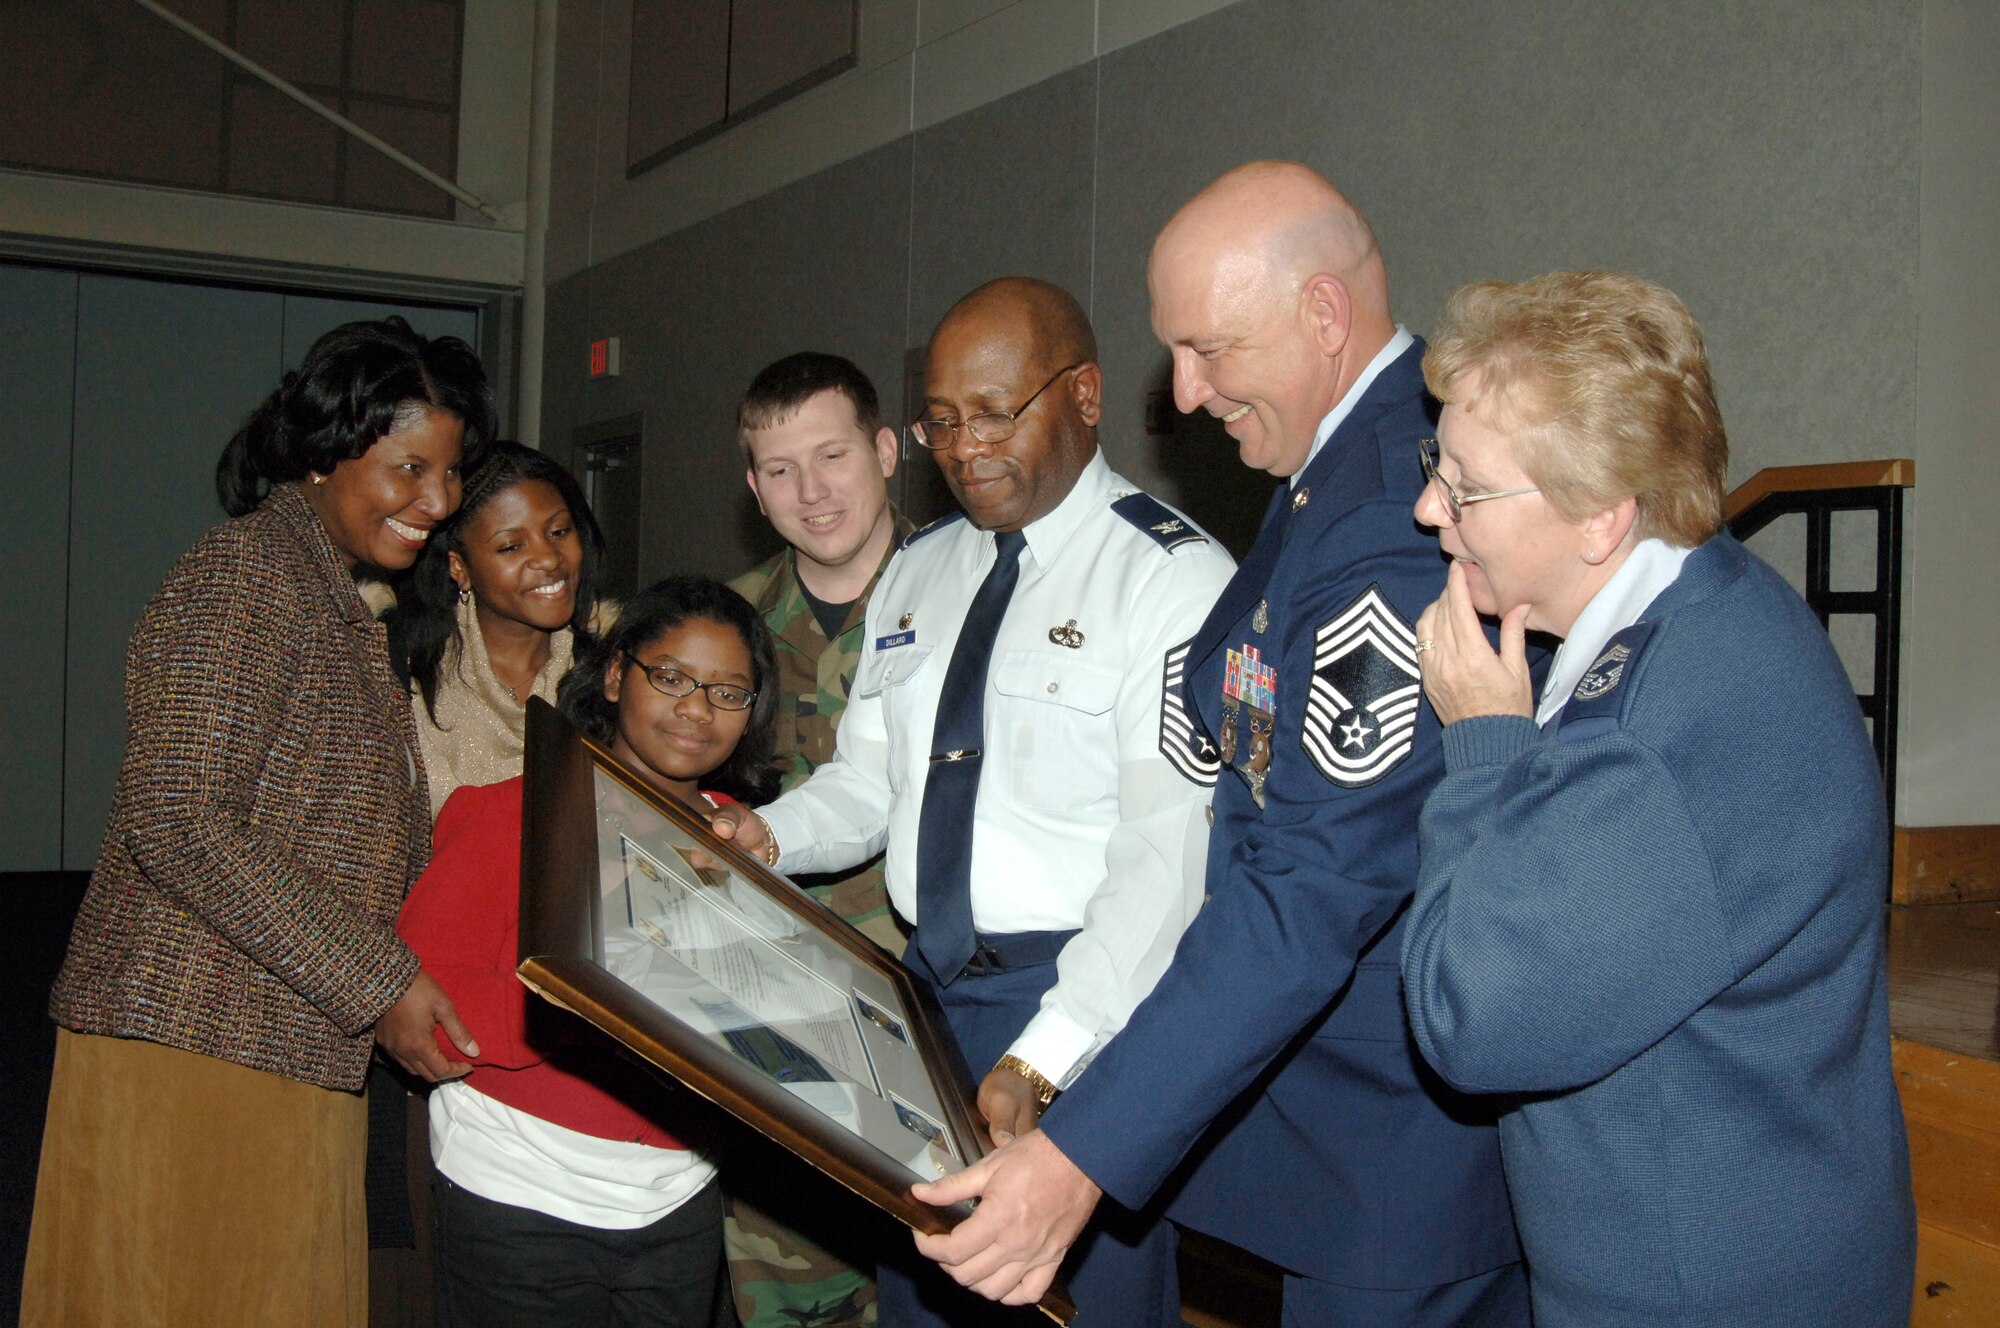 Colonel Michael Dillard, 22nd Maintenance Group commander and his family view a plaque that was presented to him by the Chief’s group and McConnell members for being inducted as an honorary enlisted chief master sergeant at a promotion ceremony Nov. 30. (photo by Tech. Sgt. Chyrece Campbell) 